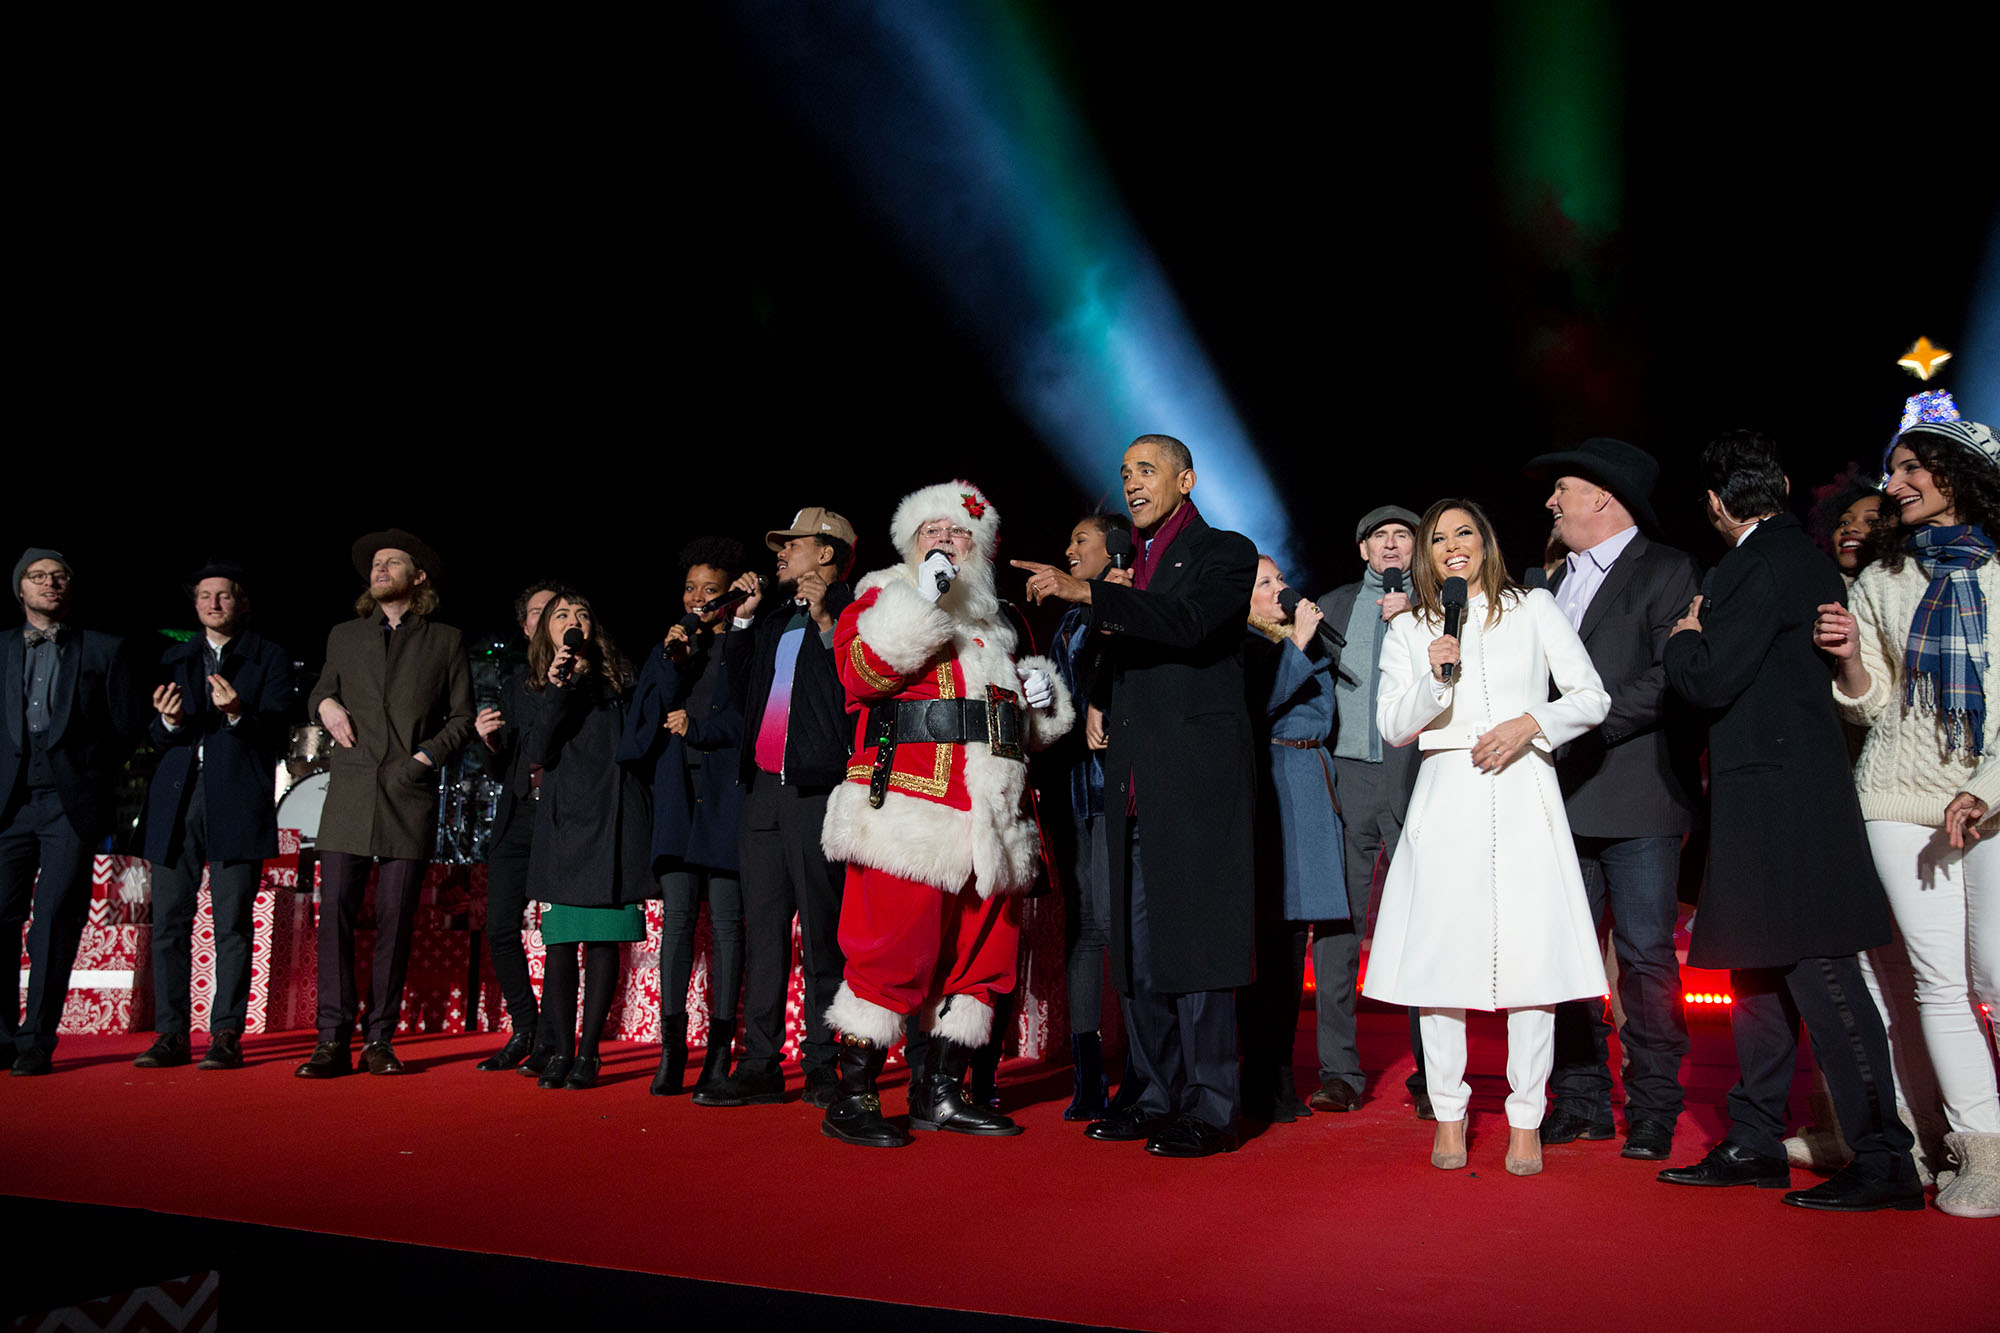 President Barack Obama, First Lady Michelle Obama and daughter Sasha join performers on stage to sing "Jingle Bells" during the National Christmas Tree lighting event on the Ellipse in Washington, D.C., Dec. 1, 2016. (Official White House Photo by Pete Souza)